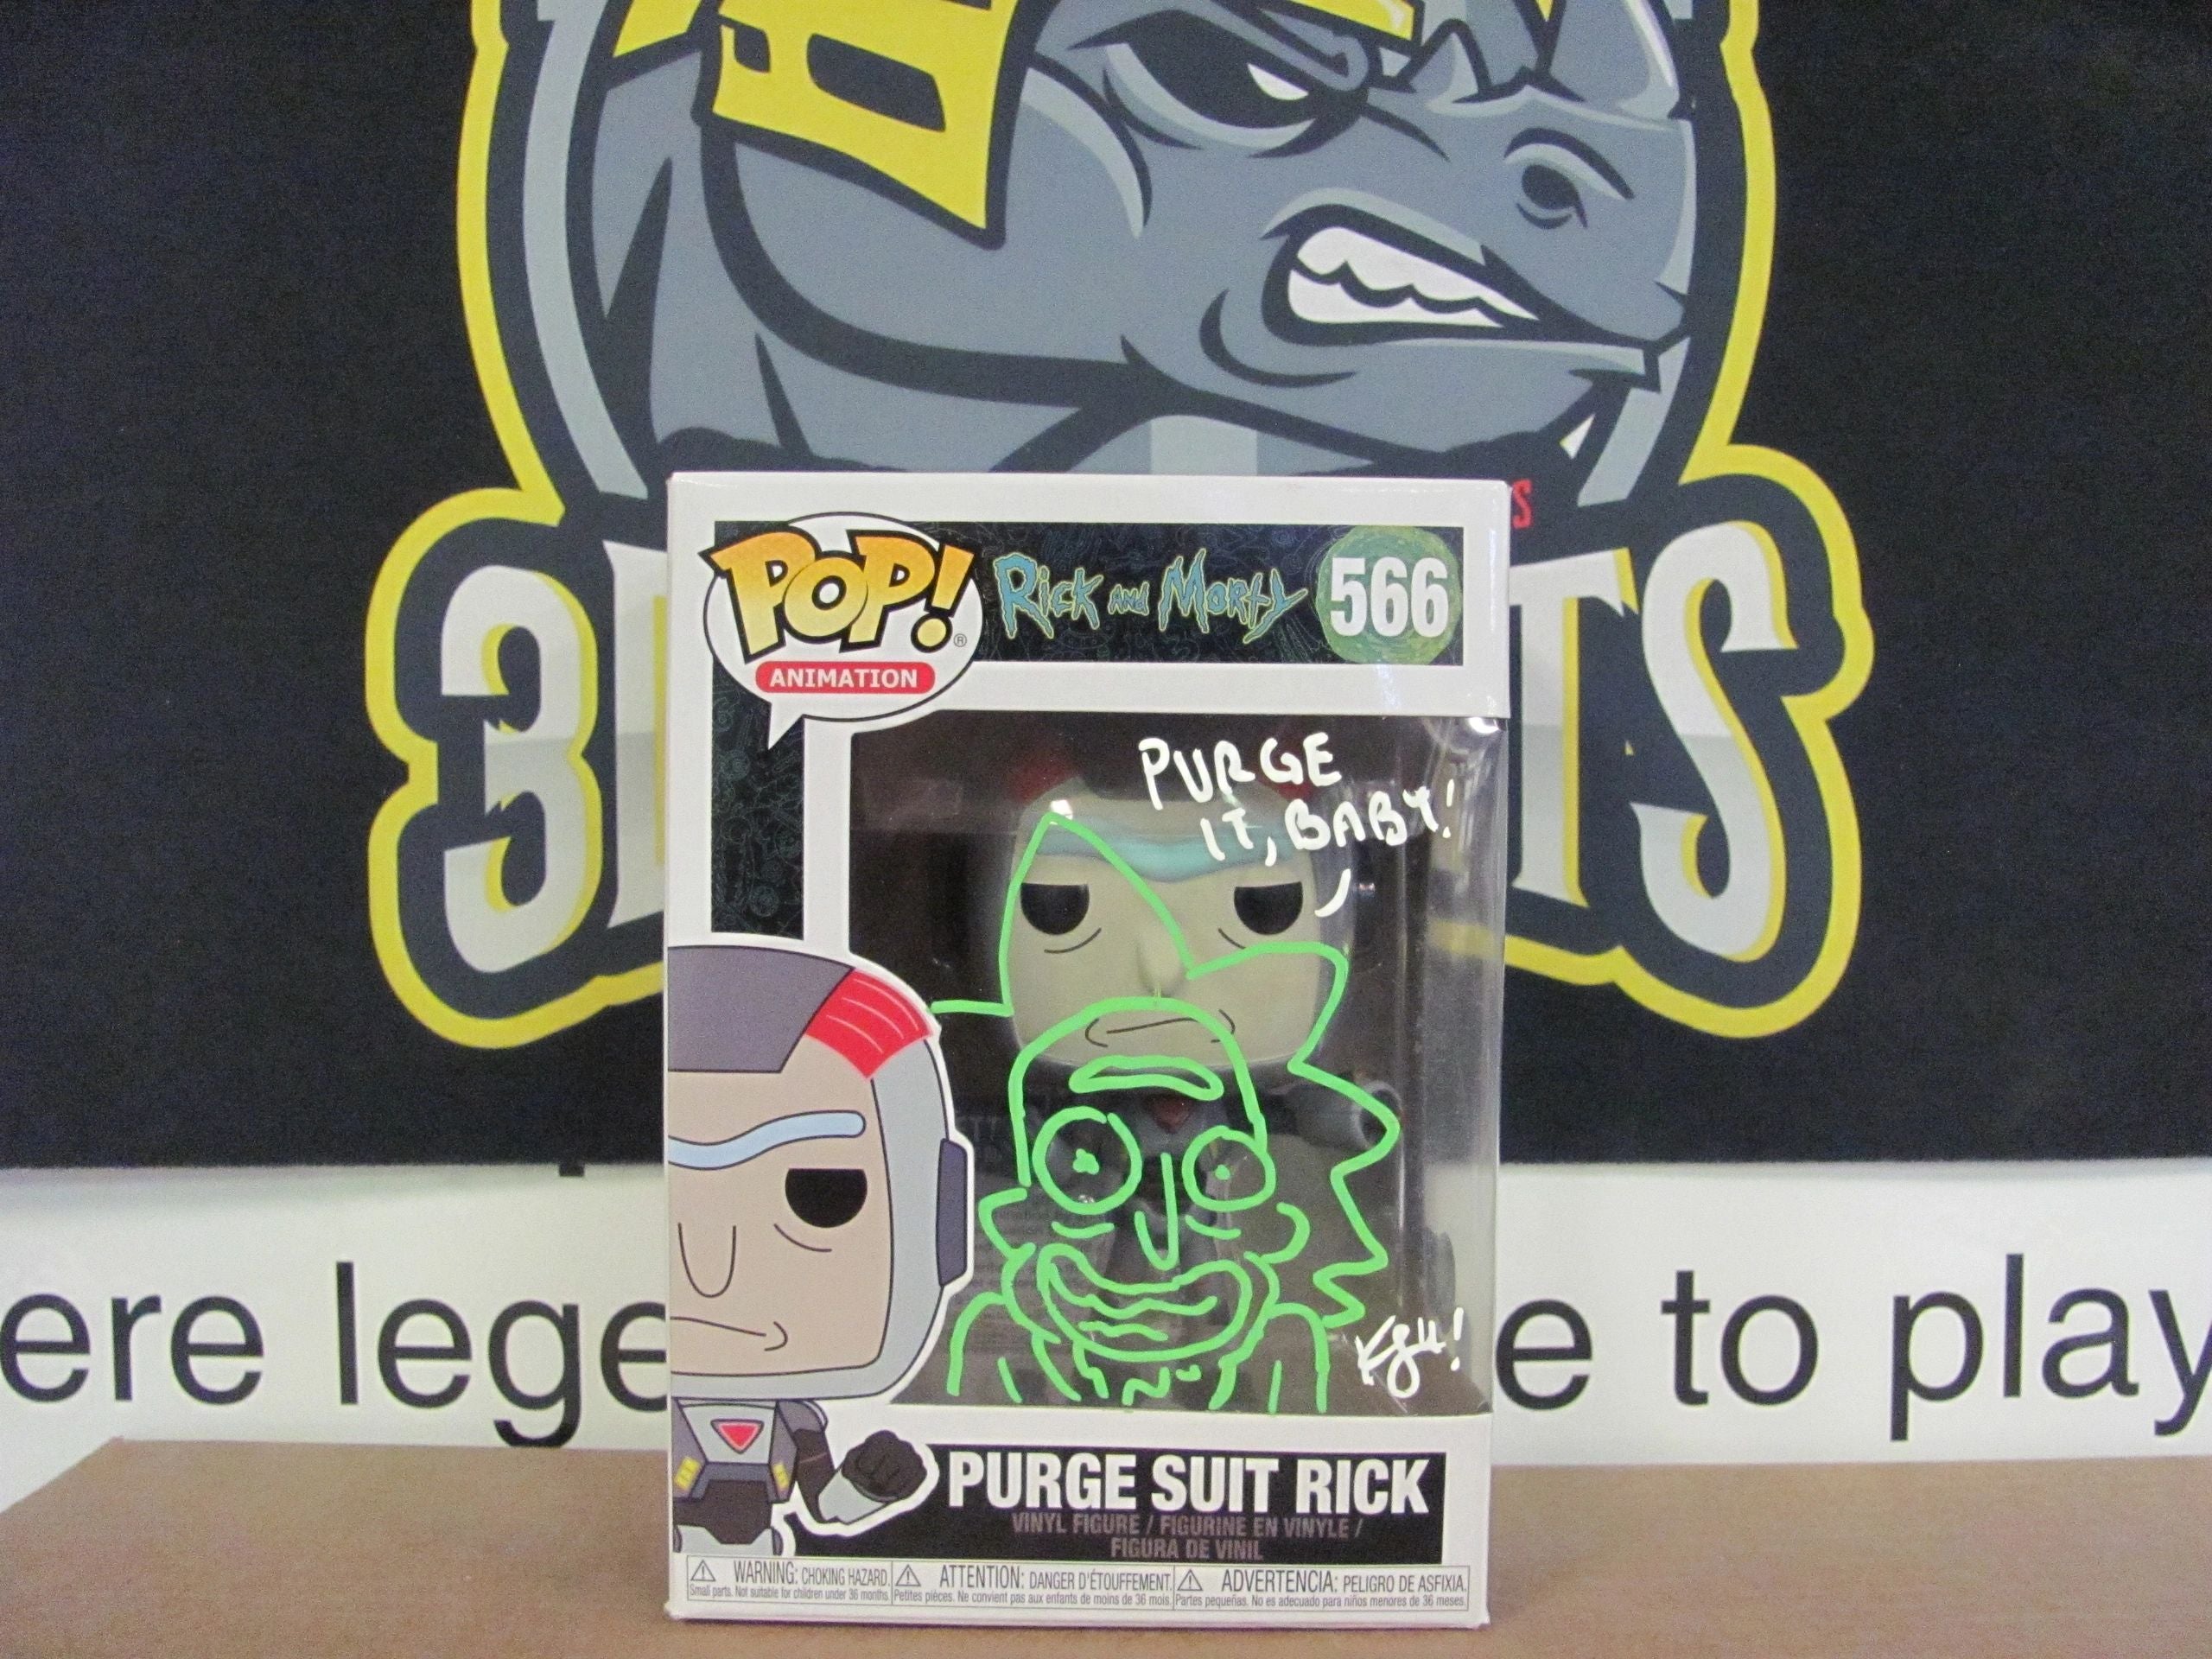 Kyle Starks Funko POP! Animation Rick and Morty #566 Purge Suit Rick Vinyl Inscribed "Purge it, Baby!" W/Beckett COA